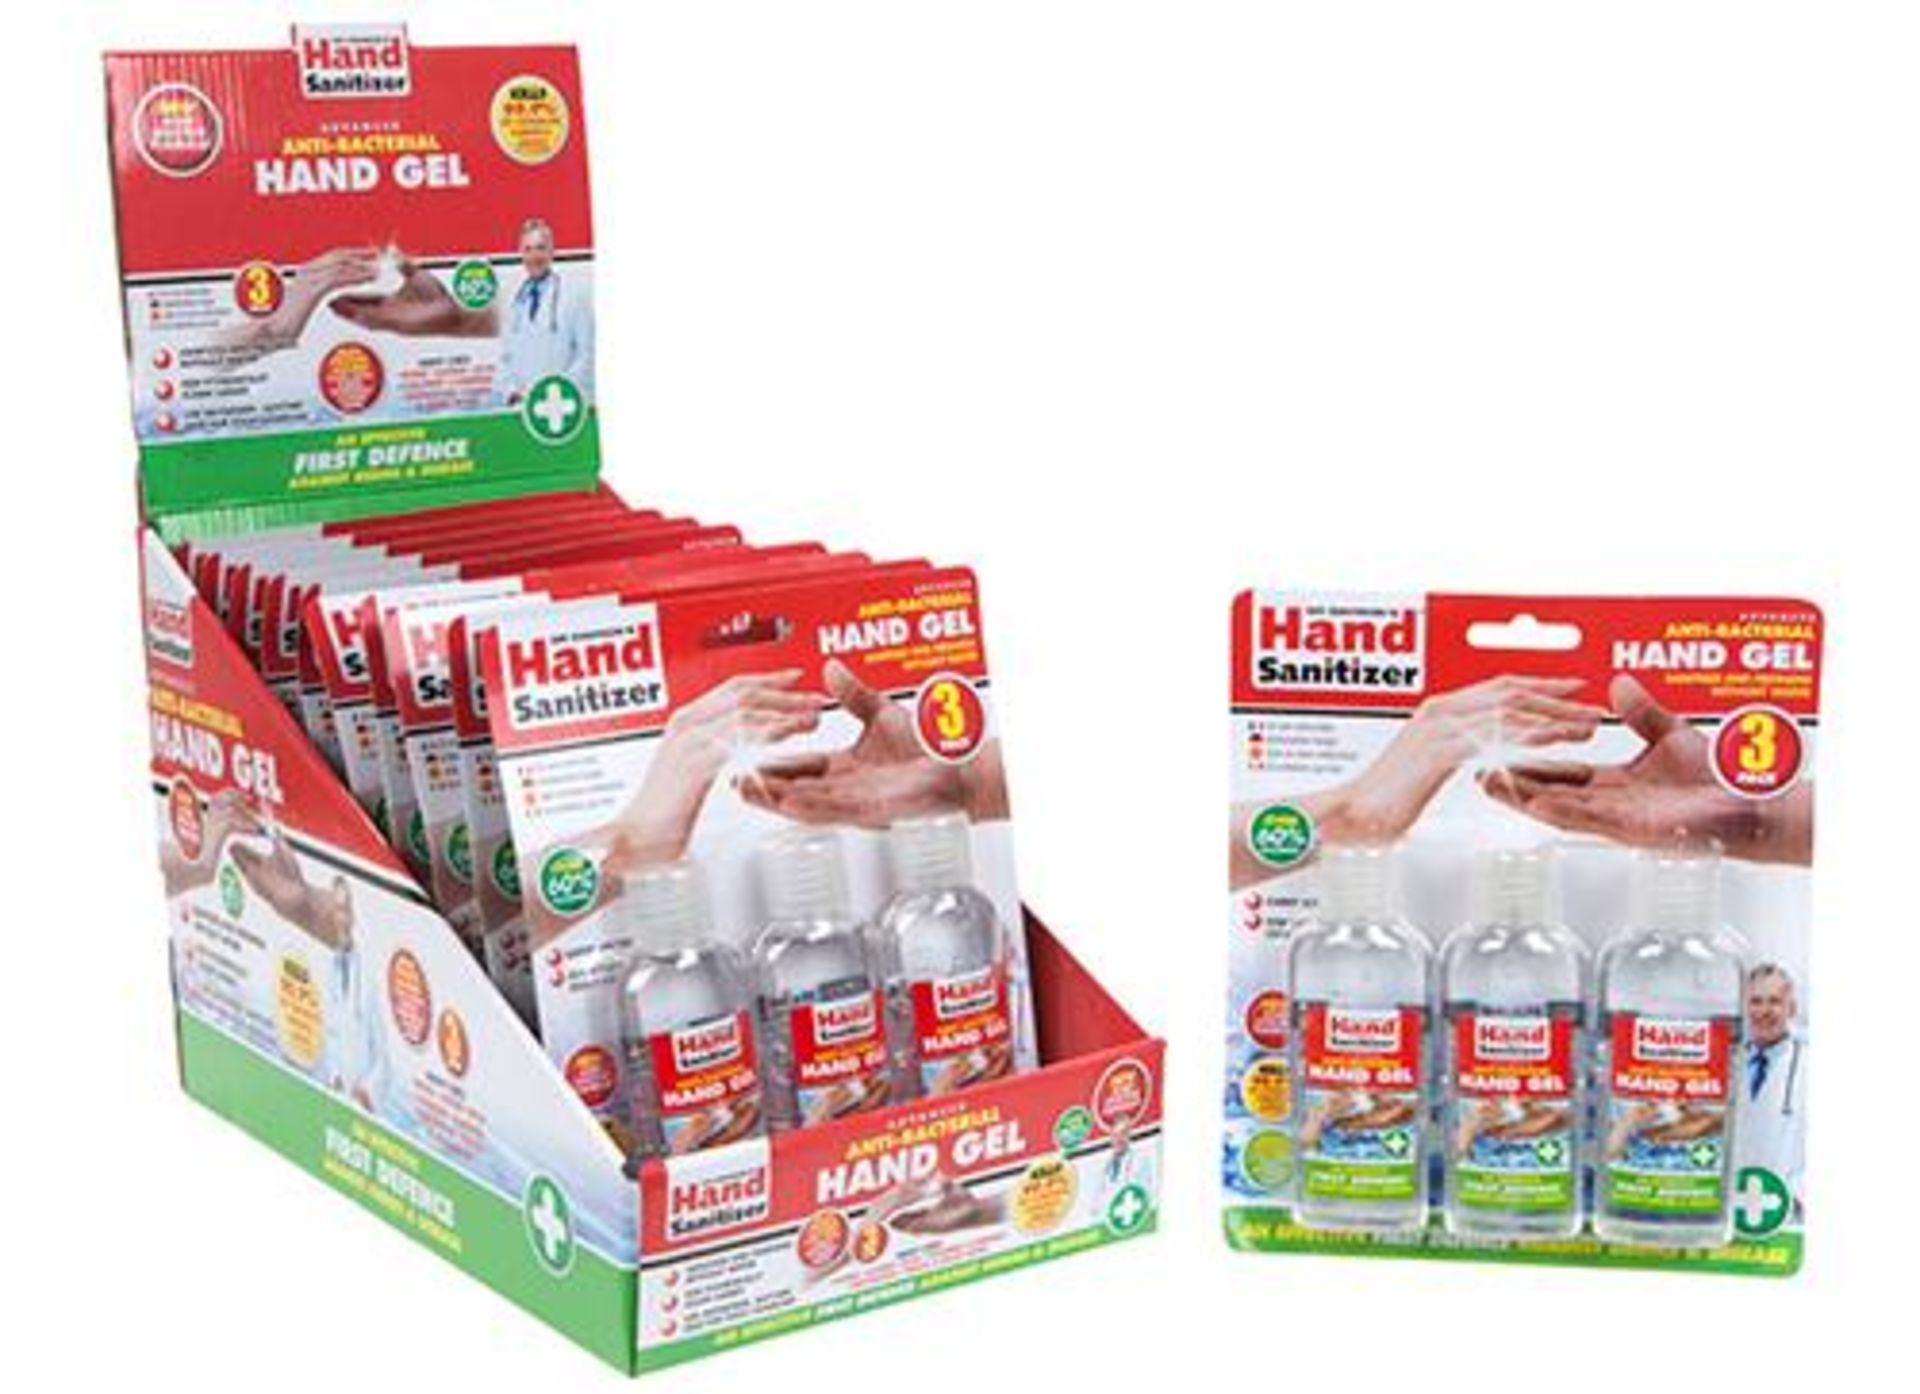 V *TRADE QTY* Brand New 3 Bottles of Antibacterial Hand Sanitiser X 12 YOUR BID PRICE TO BE